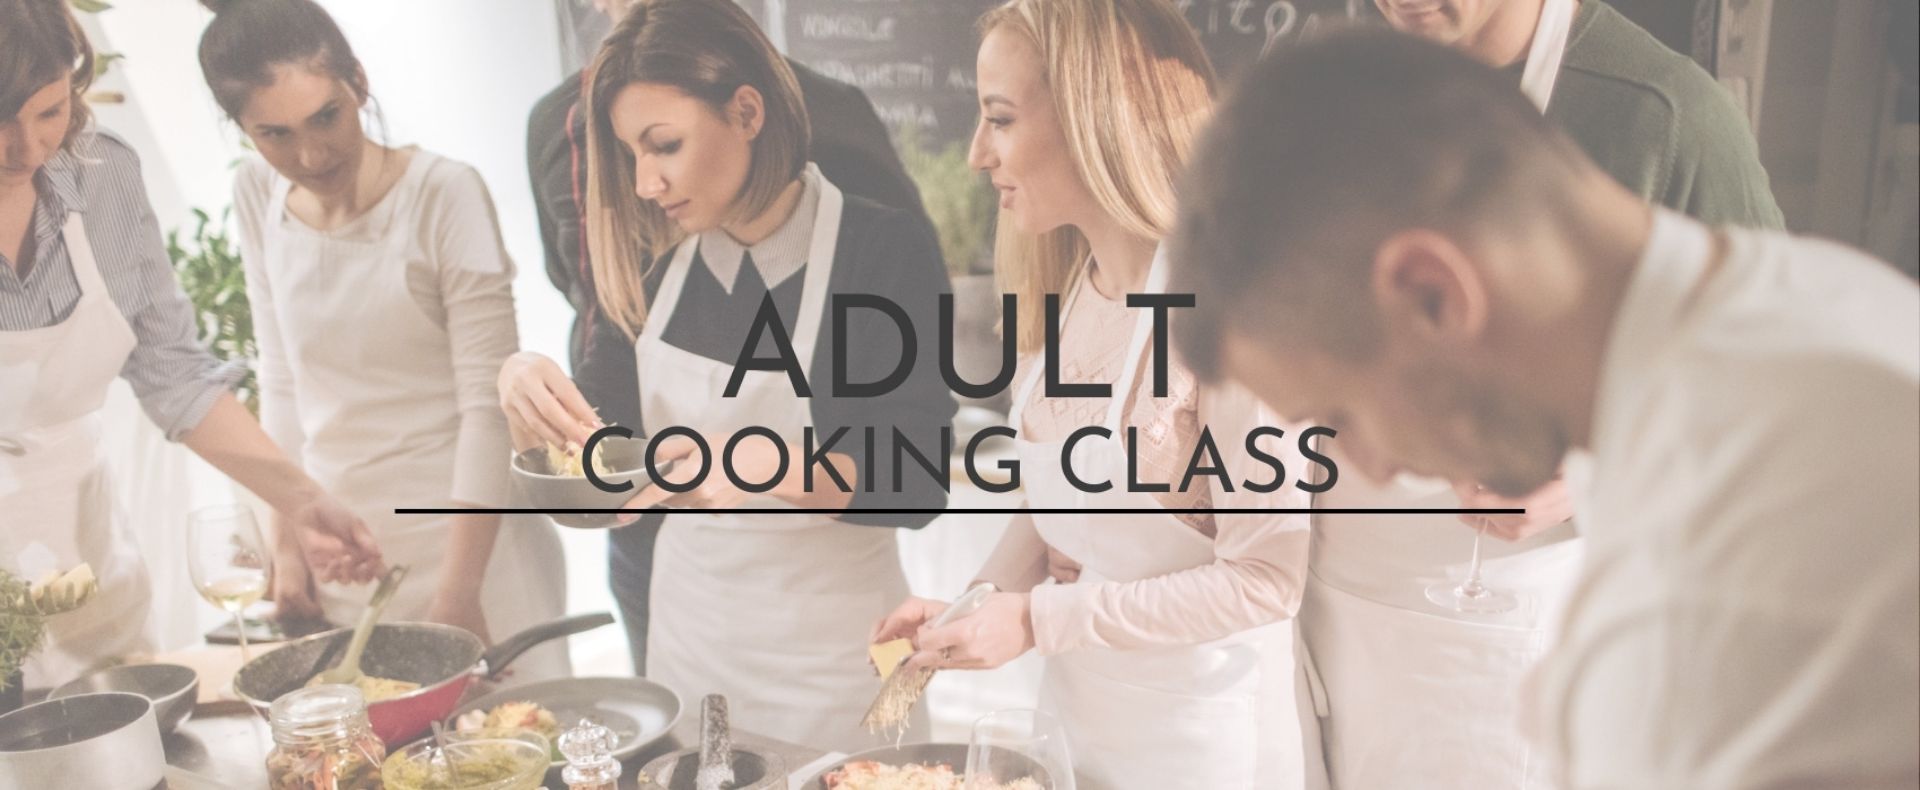 Adult Cooking Class at The Highlands